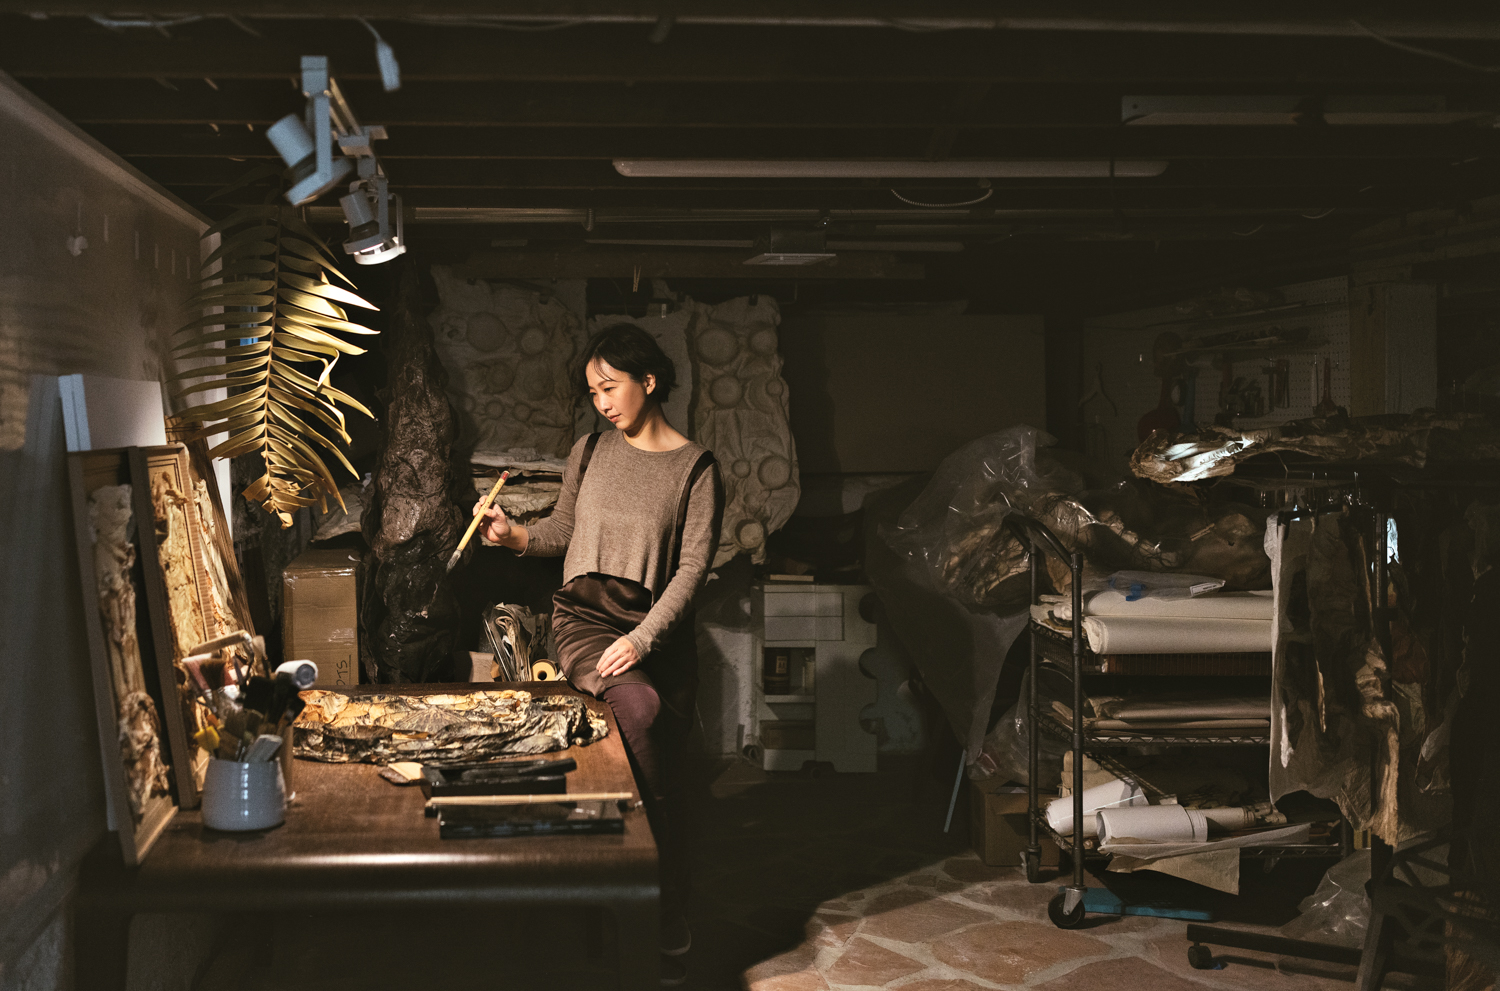 A Korean-American artist stands in her art studio holding a paintbrush